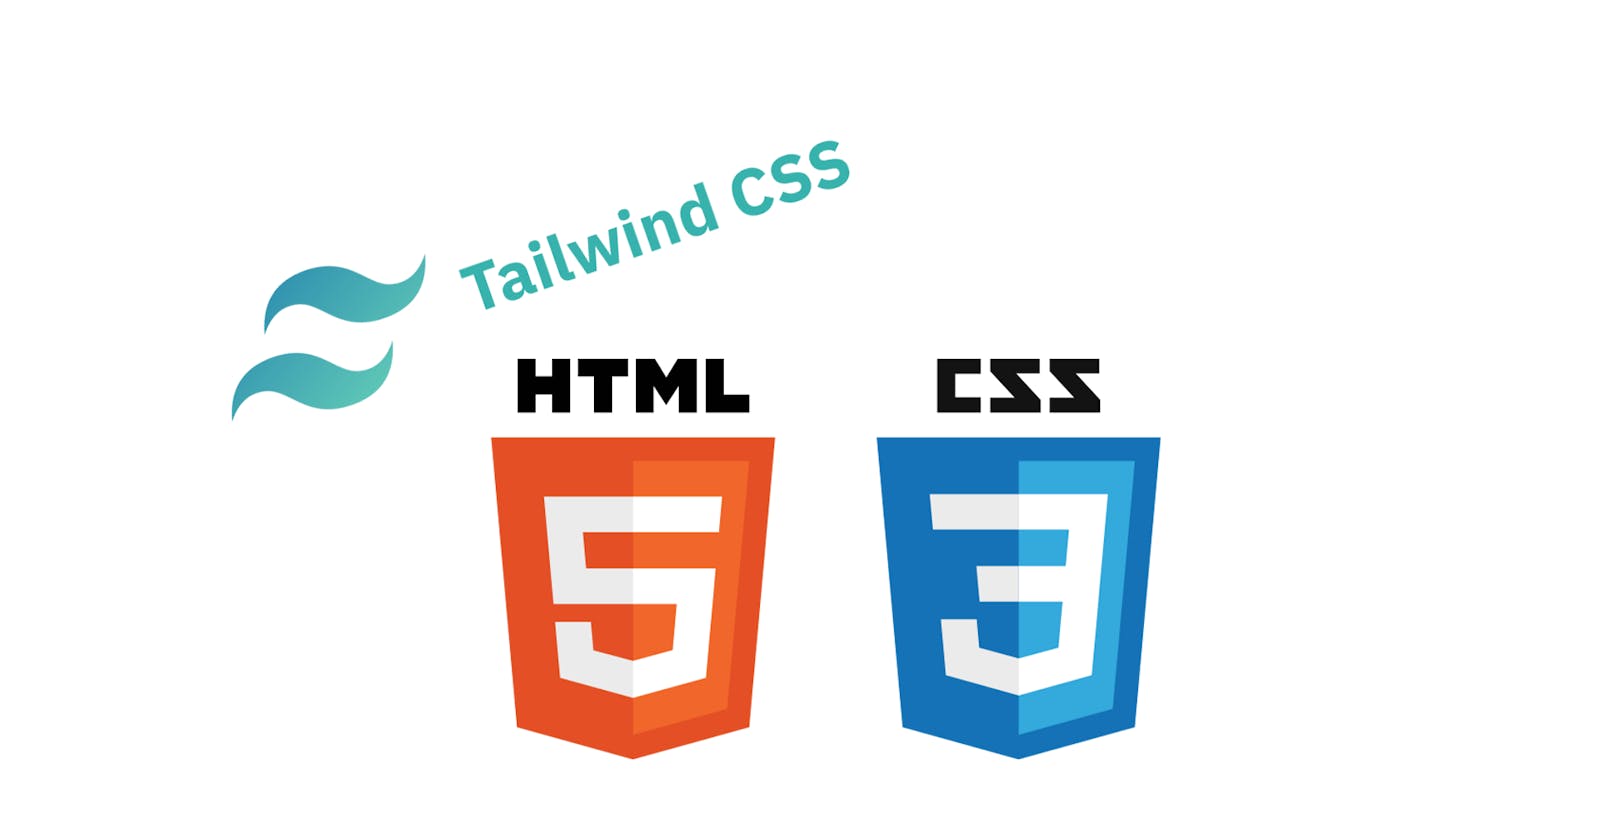 Why I switched from normal CSS to Tailwind CSS